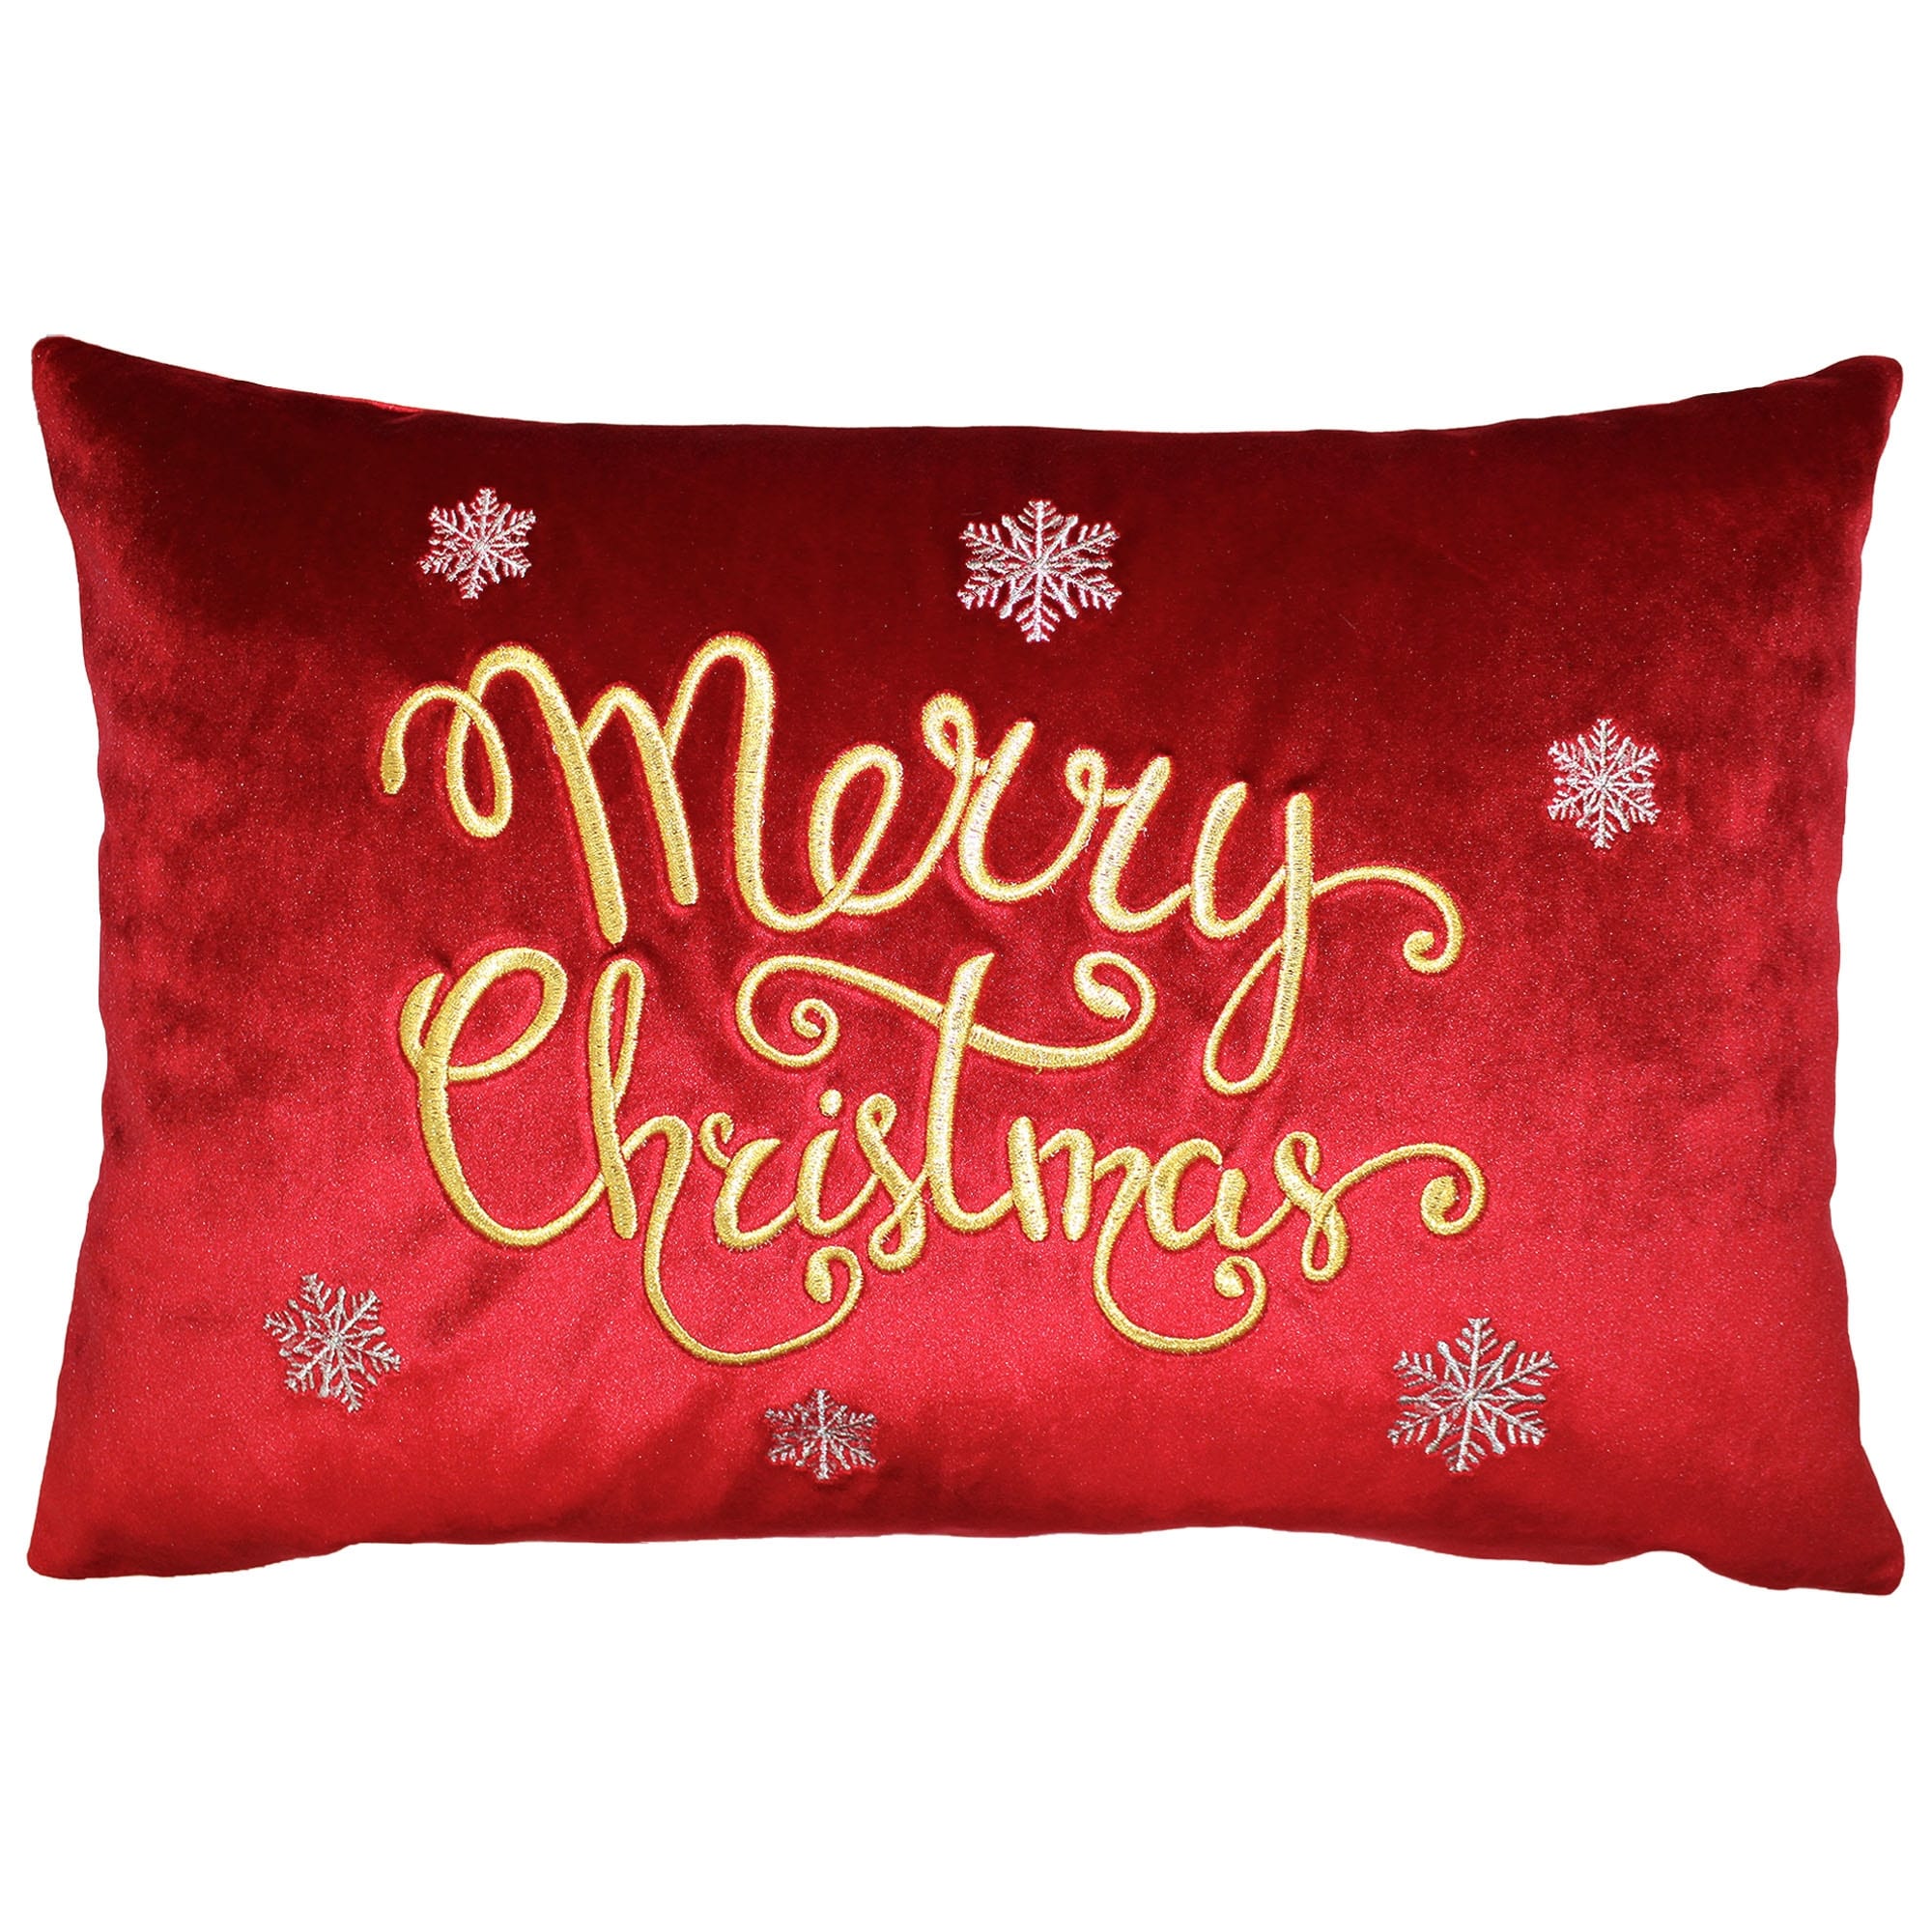 https://ak1.ostkcdn.com/images/products/is/images/direct/5942343fefd4771a58facb2eb50c30d975060540/Rodeo-Home-Christmas-Decorative-Pillow-%22Merry-Christmas%22-with-Snowflakes-Design-Embroidery.jpg